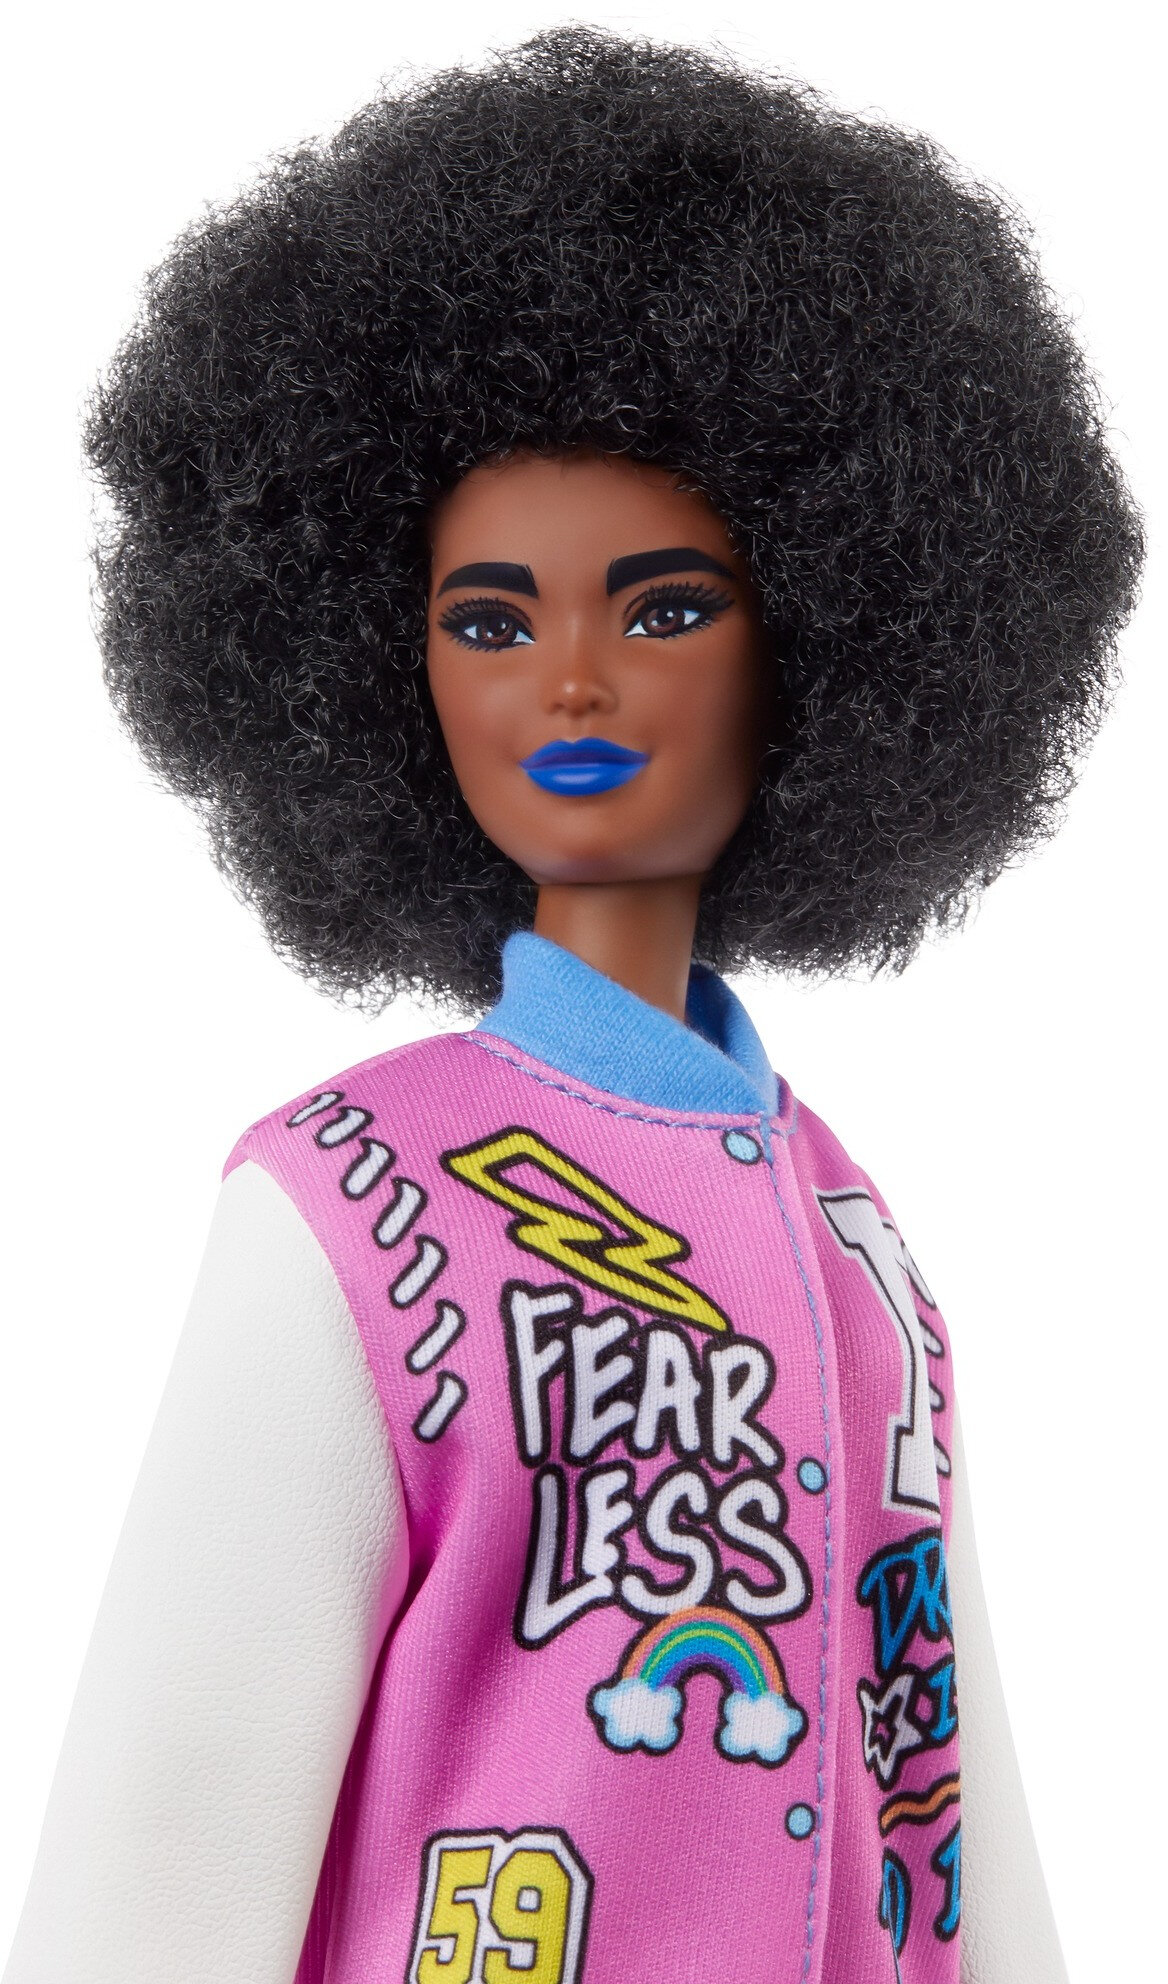 Barbie Fashionistas Doll #156 with Brunette Afro & Blue Lips Wearing Graphic Coat Dress - image 4 of 7